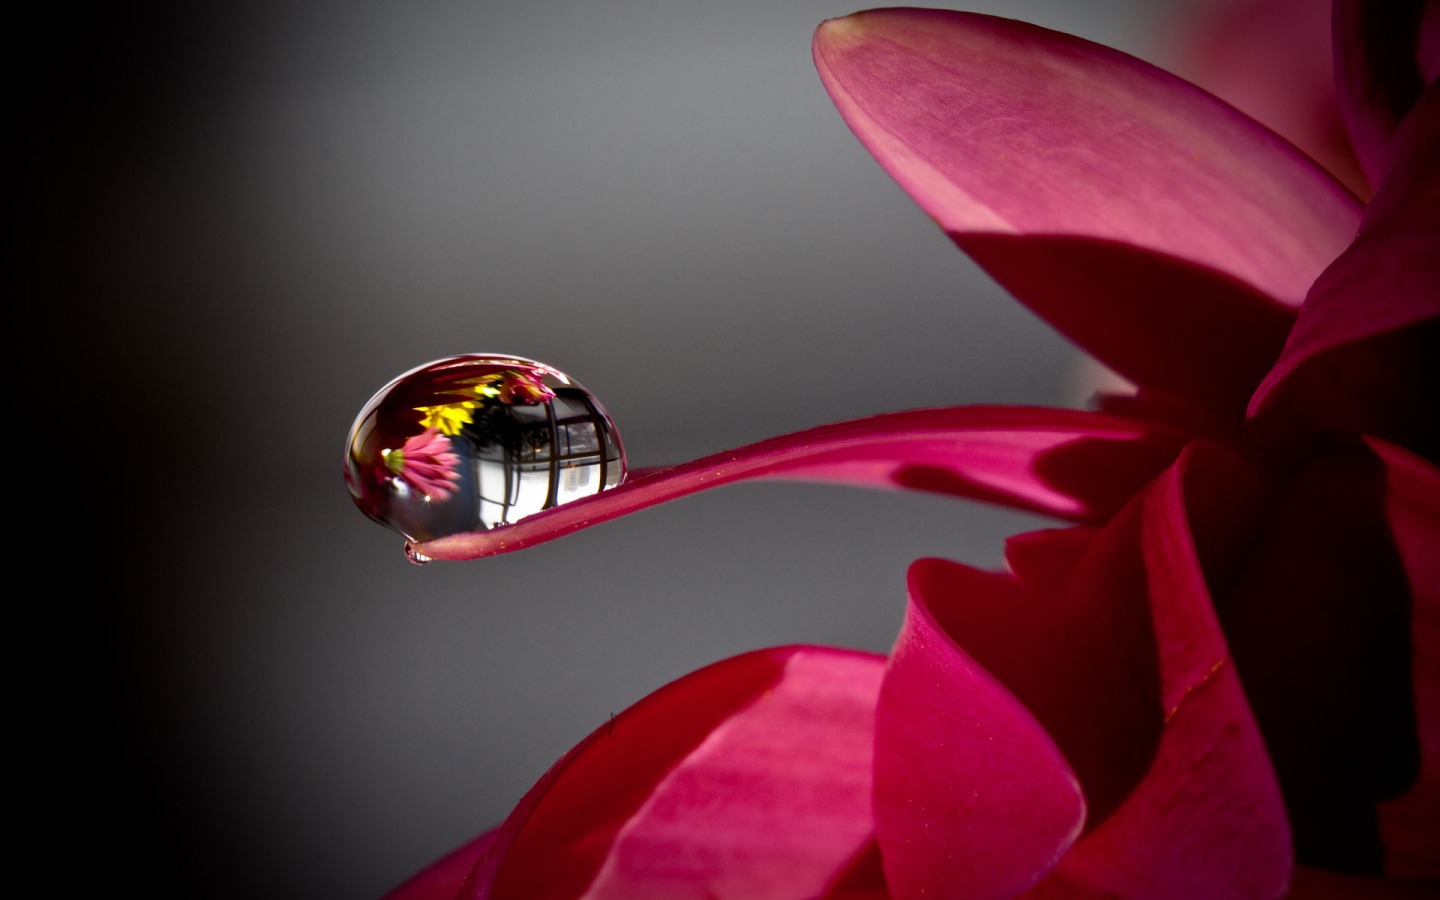 Free 3D Wallpapers Download: Water drops hd pictures